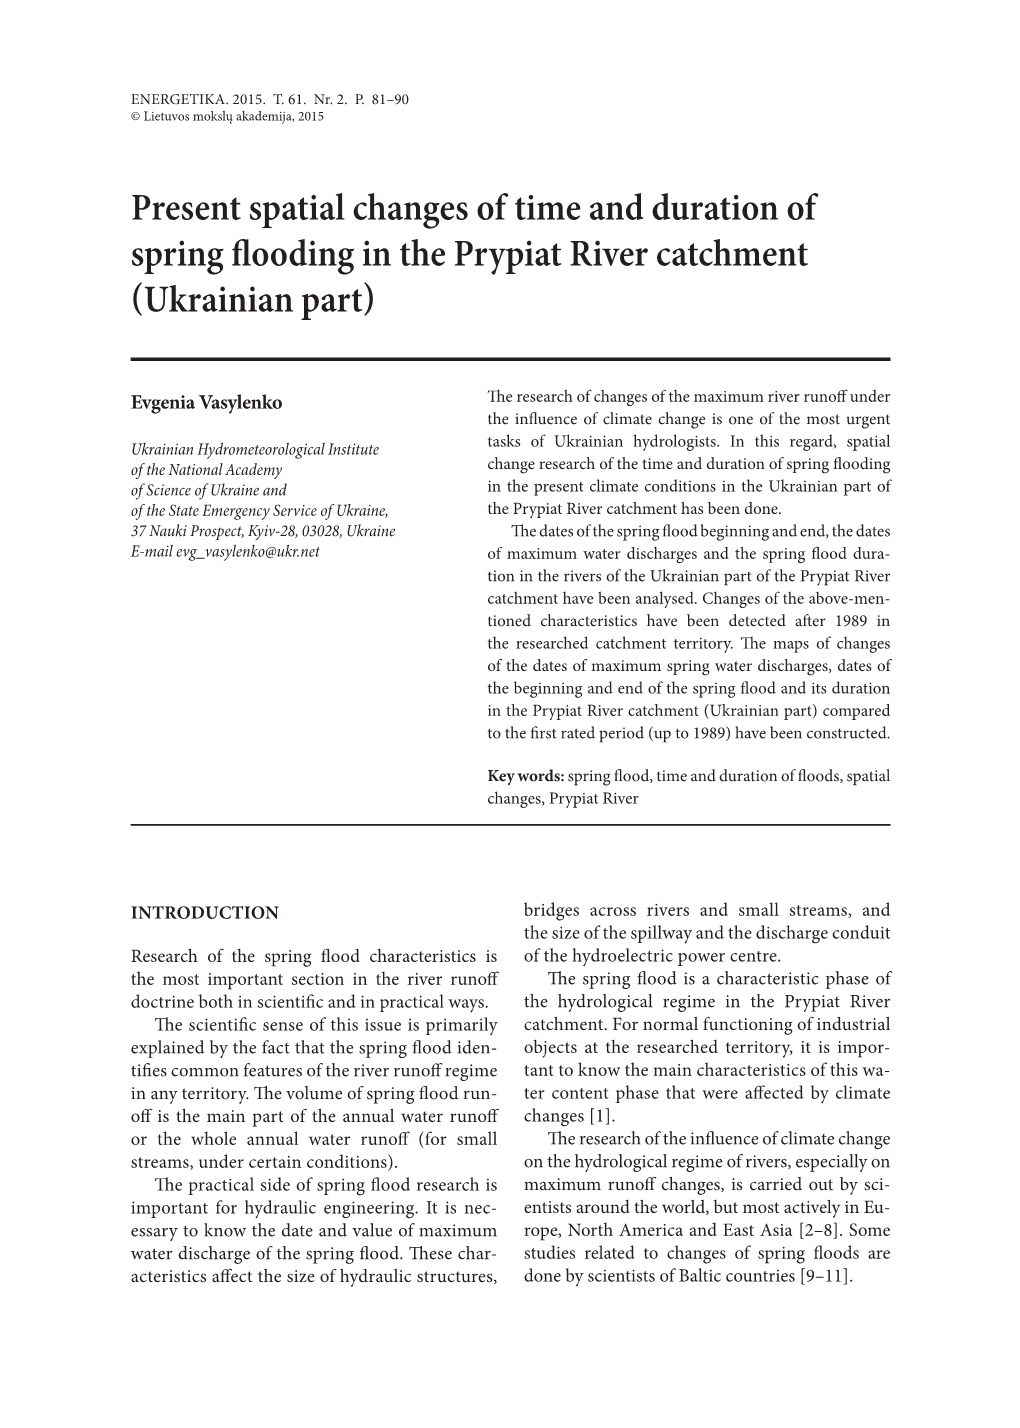 Present Spatial Changes of Time and Duration of Spring Flooding in the Prypiat River Catchment (Ukrainian Part)